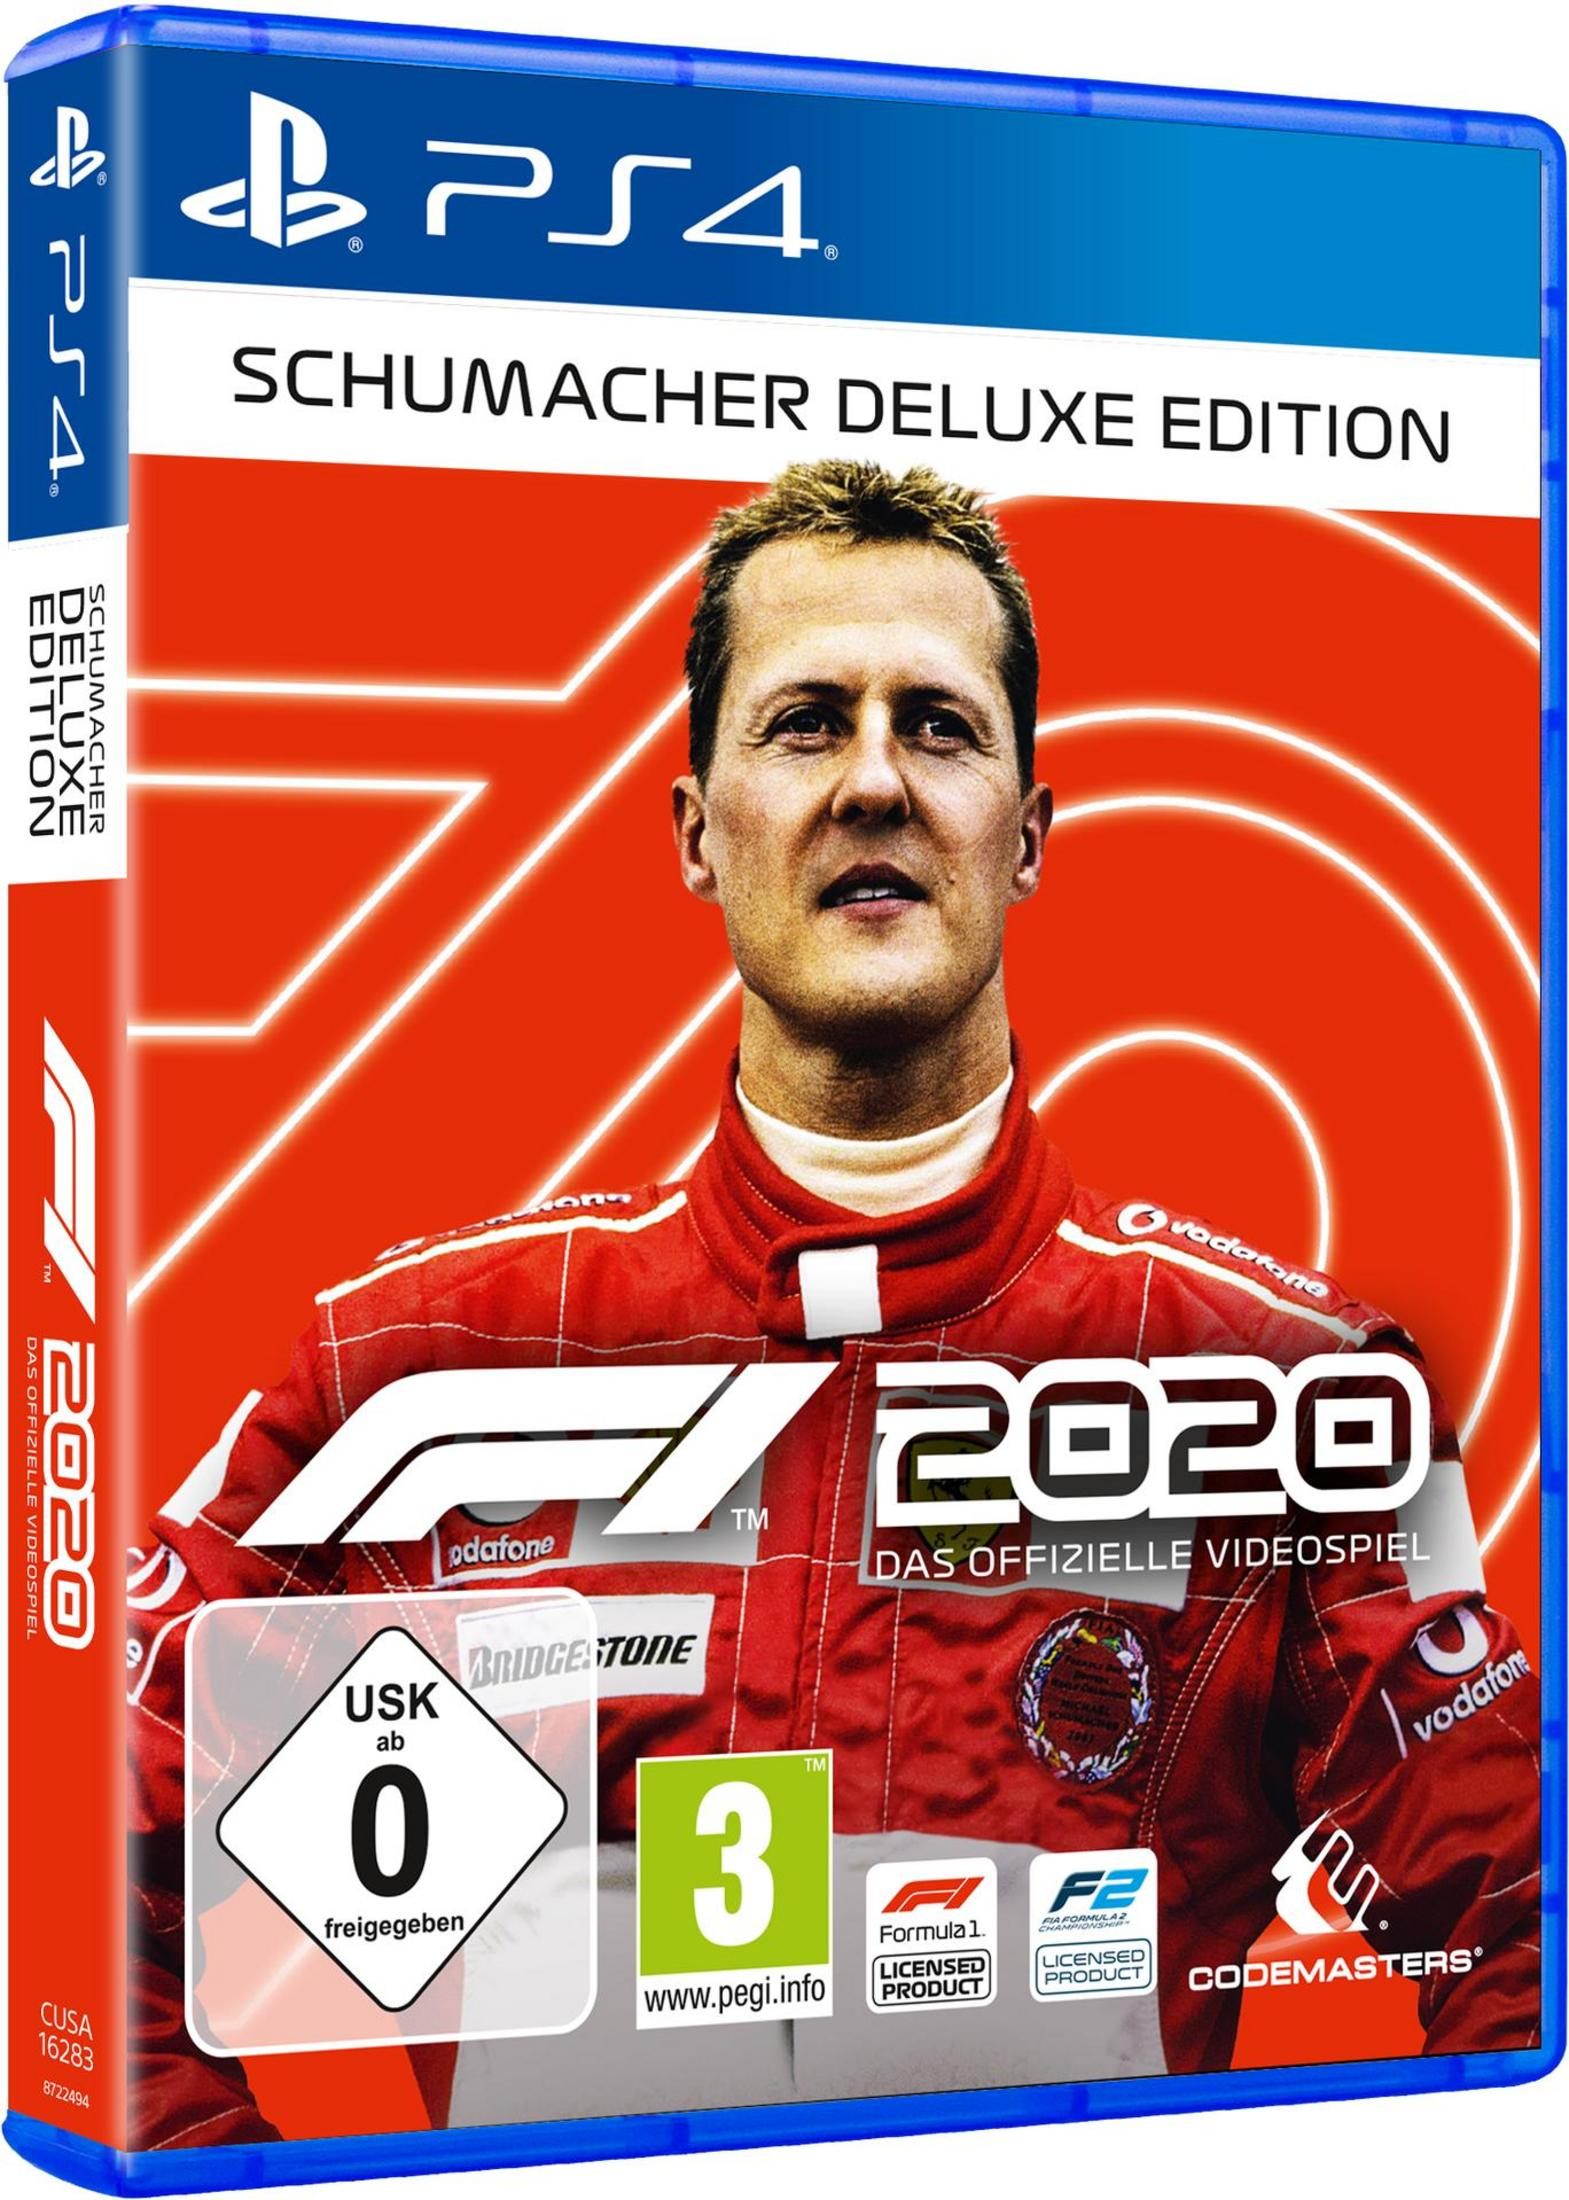 - 2020 Deluxe [PlayStation Schumacher F1 Edition 4]